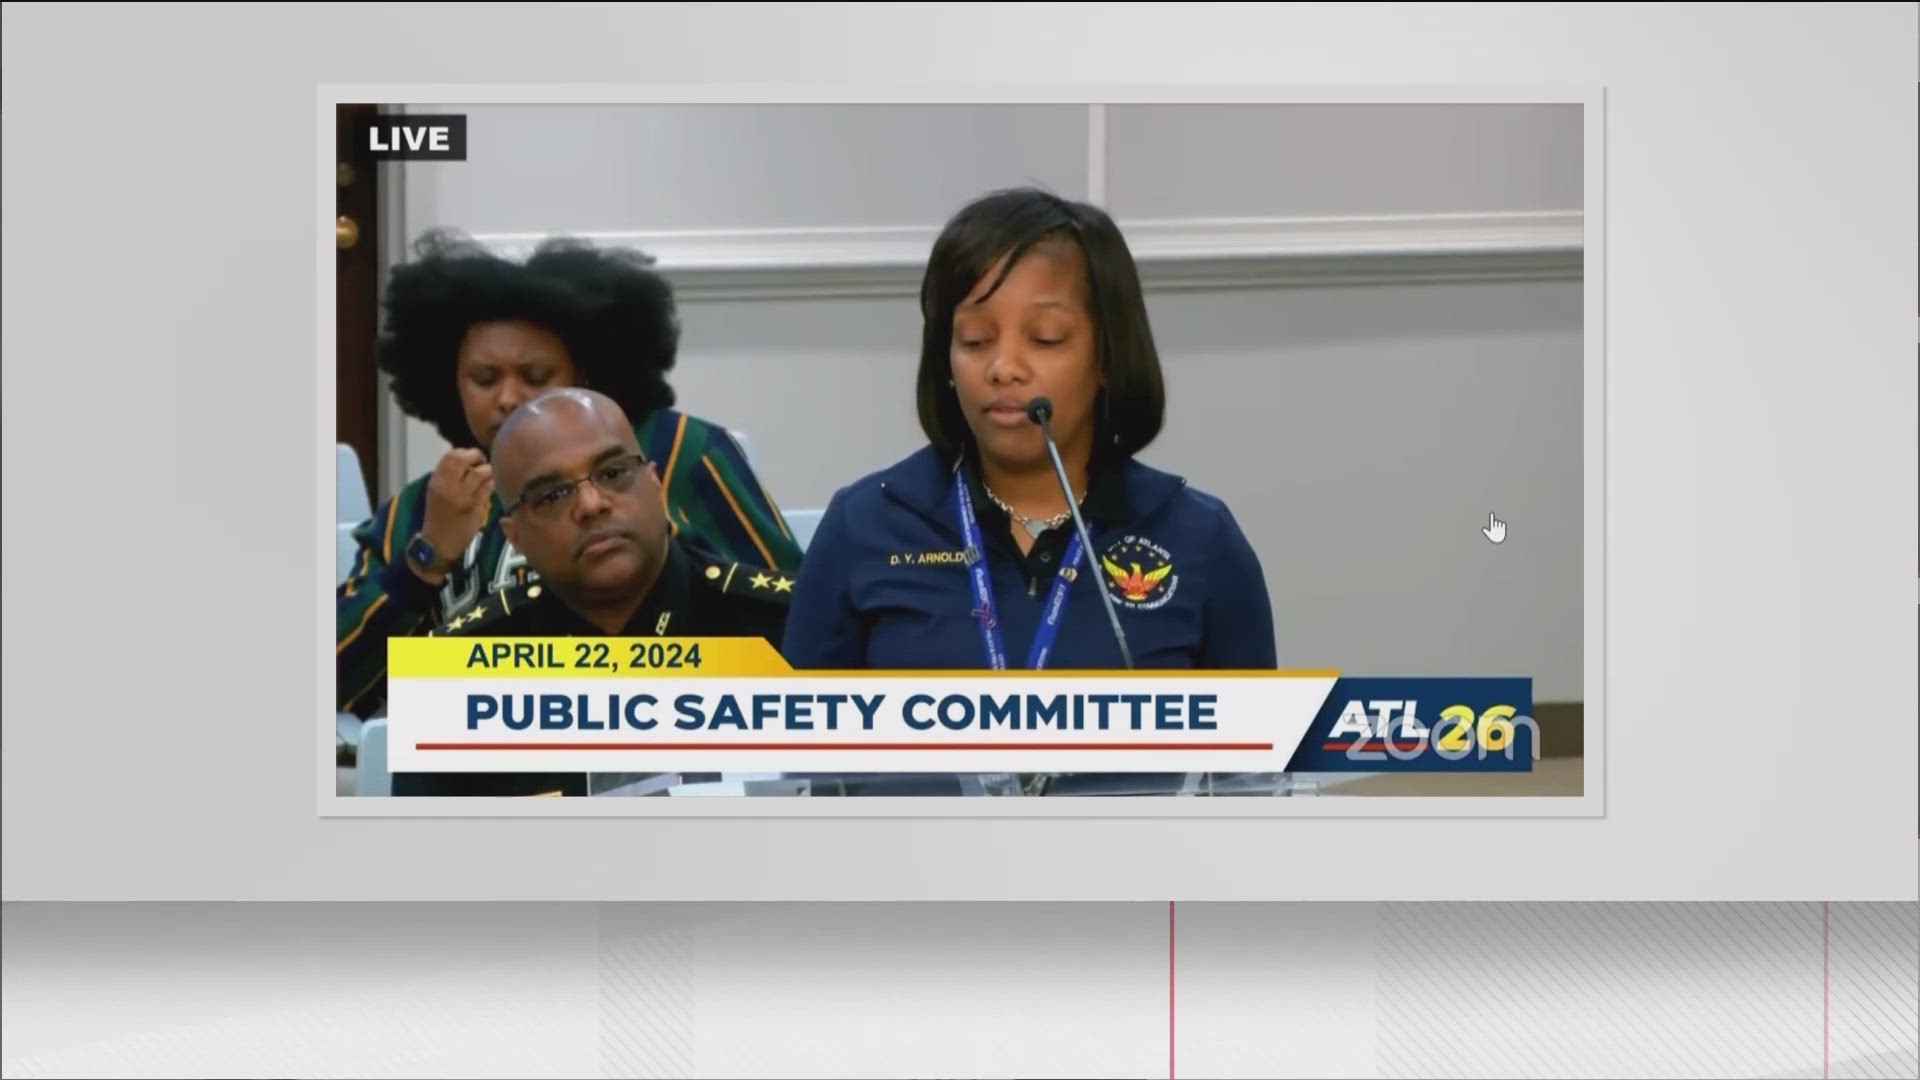 On Monday, the director of the Atlanta E-911 System addressed the city's public safety committee.